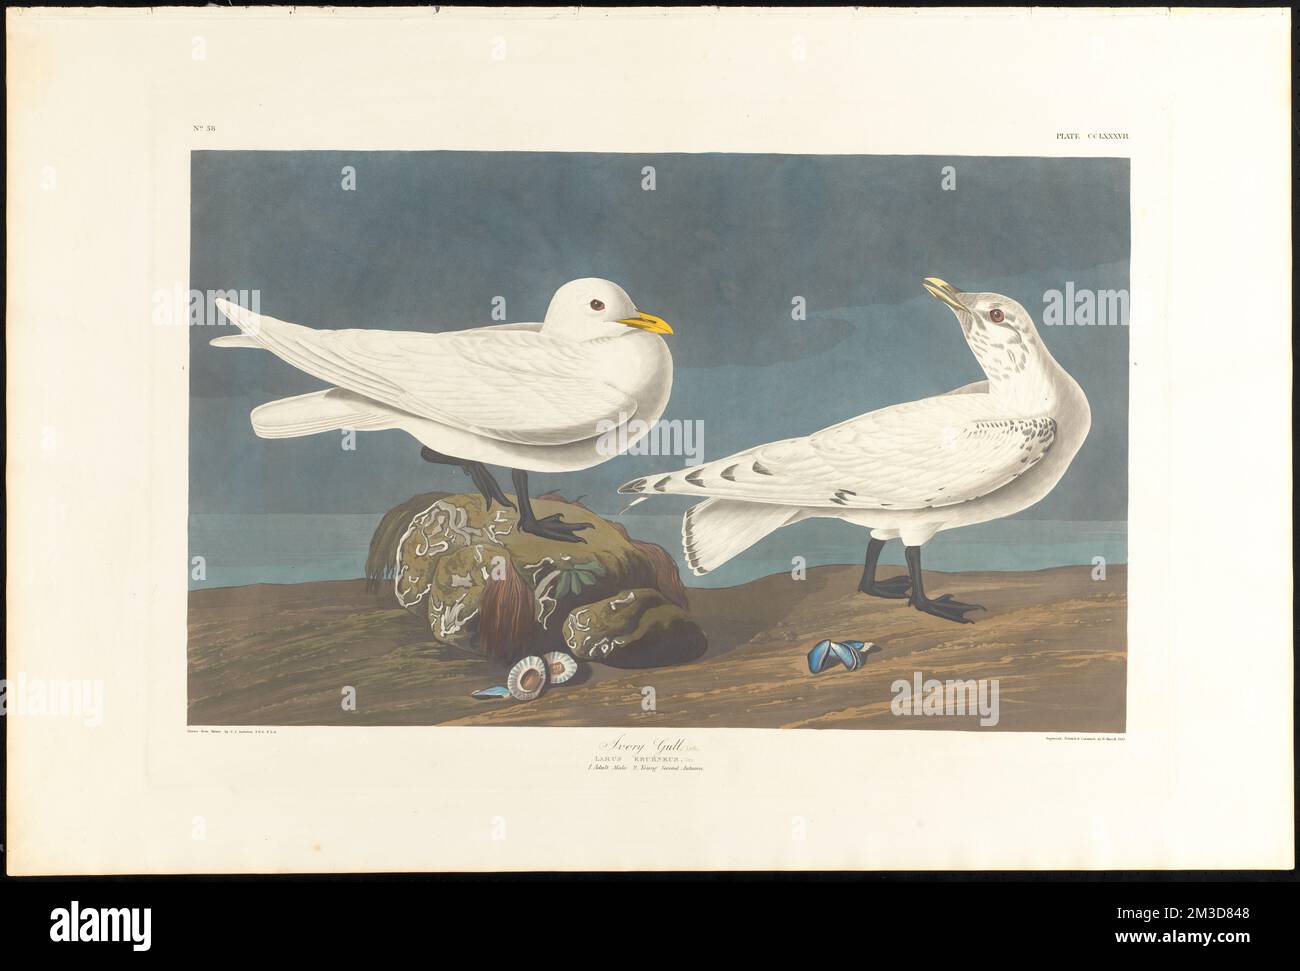 Ivory gull, Lath. : Larus eburneus, Gm. 1. Adult male. 2. Young second autumn. c.1 v.3 plate 287 , Gulls, Ivory gull. The Birds of America- From Original Drawings by John James Audubon Stock Photo